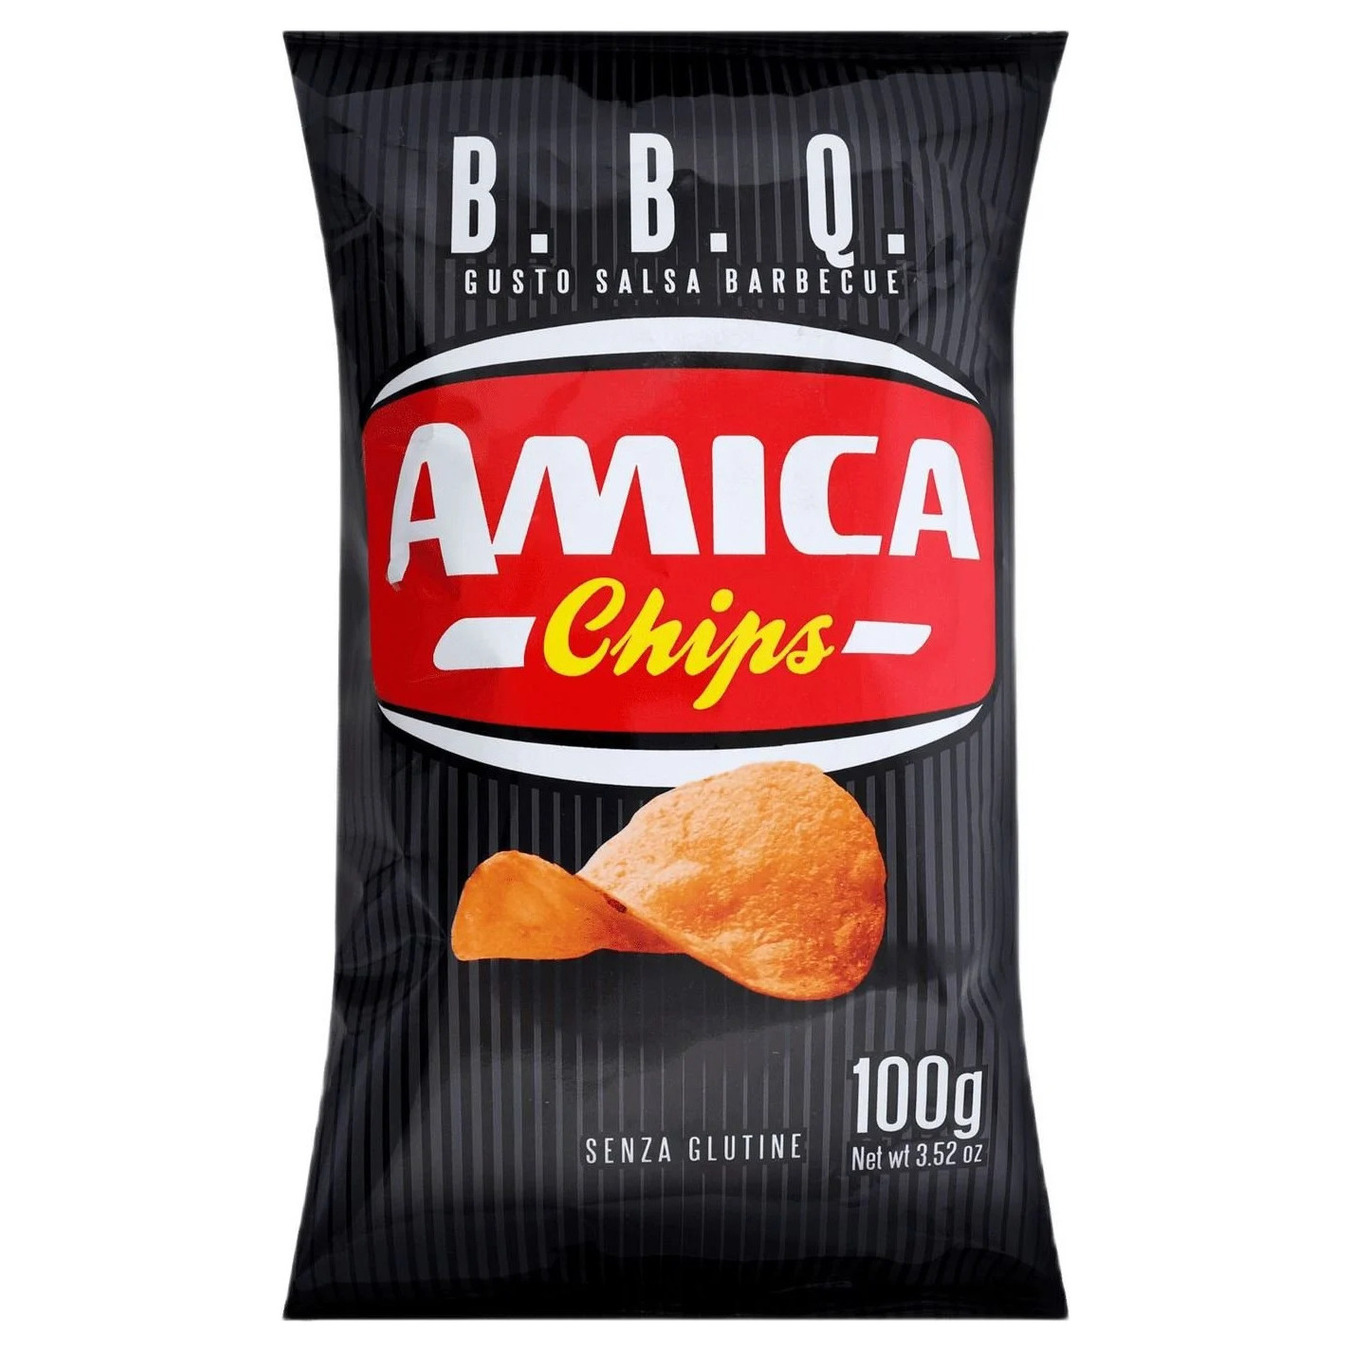 Amica potato chips with barbecue flavor 130g